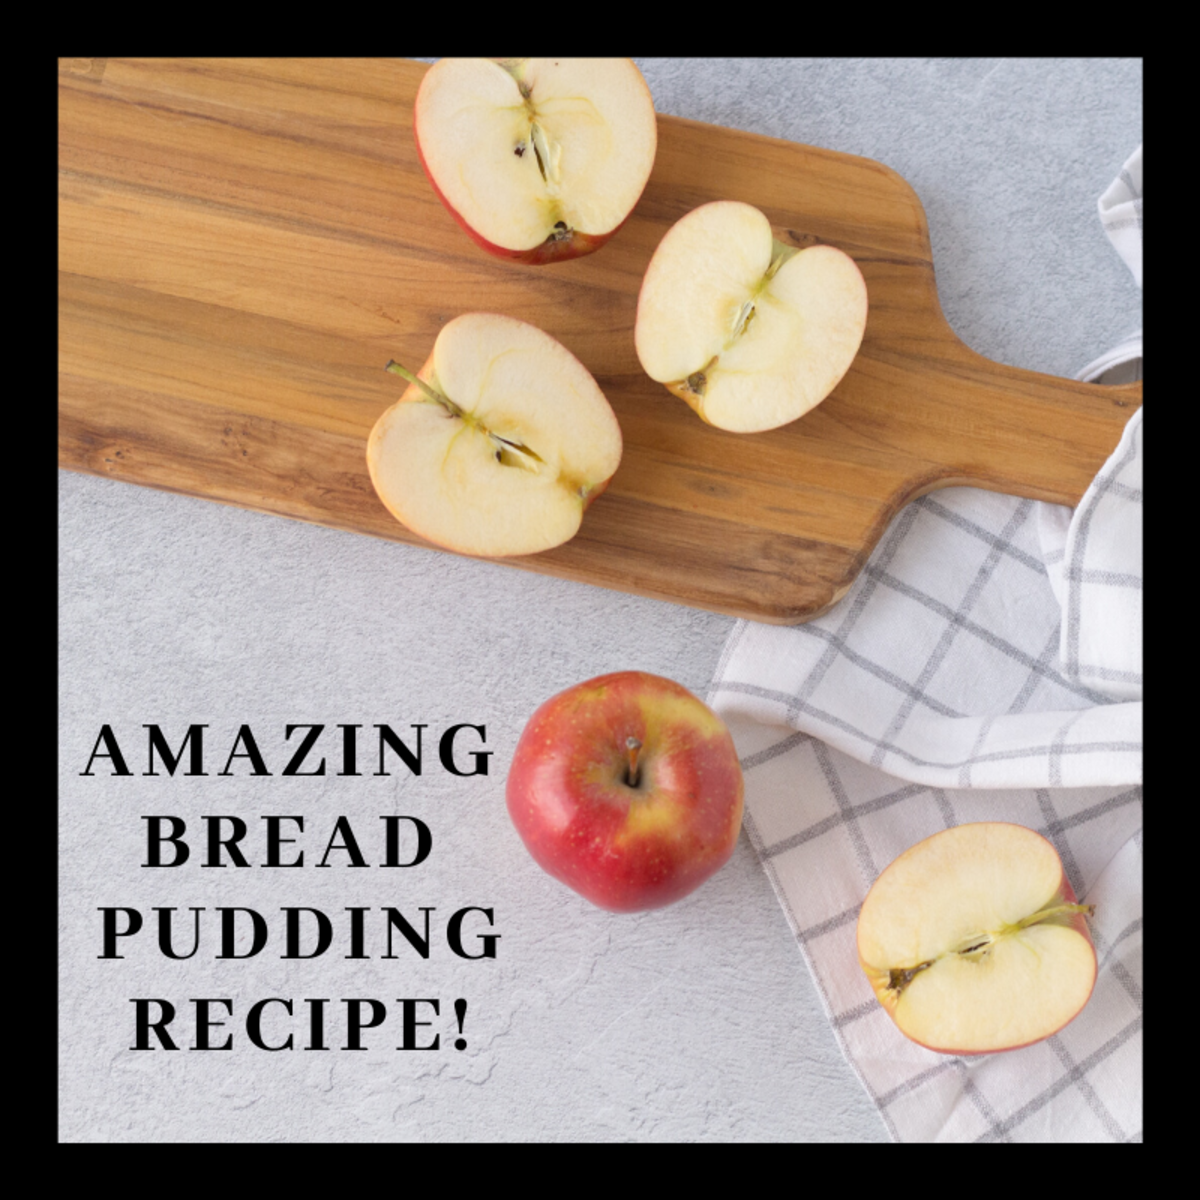 This easy bread pudding recipe will knock your socks off!